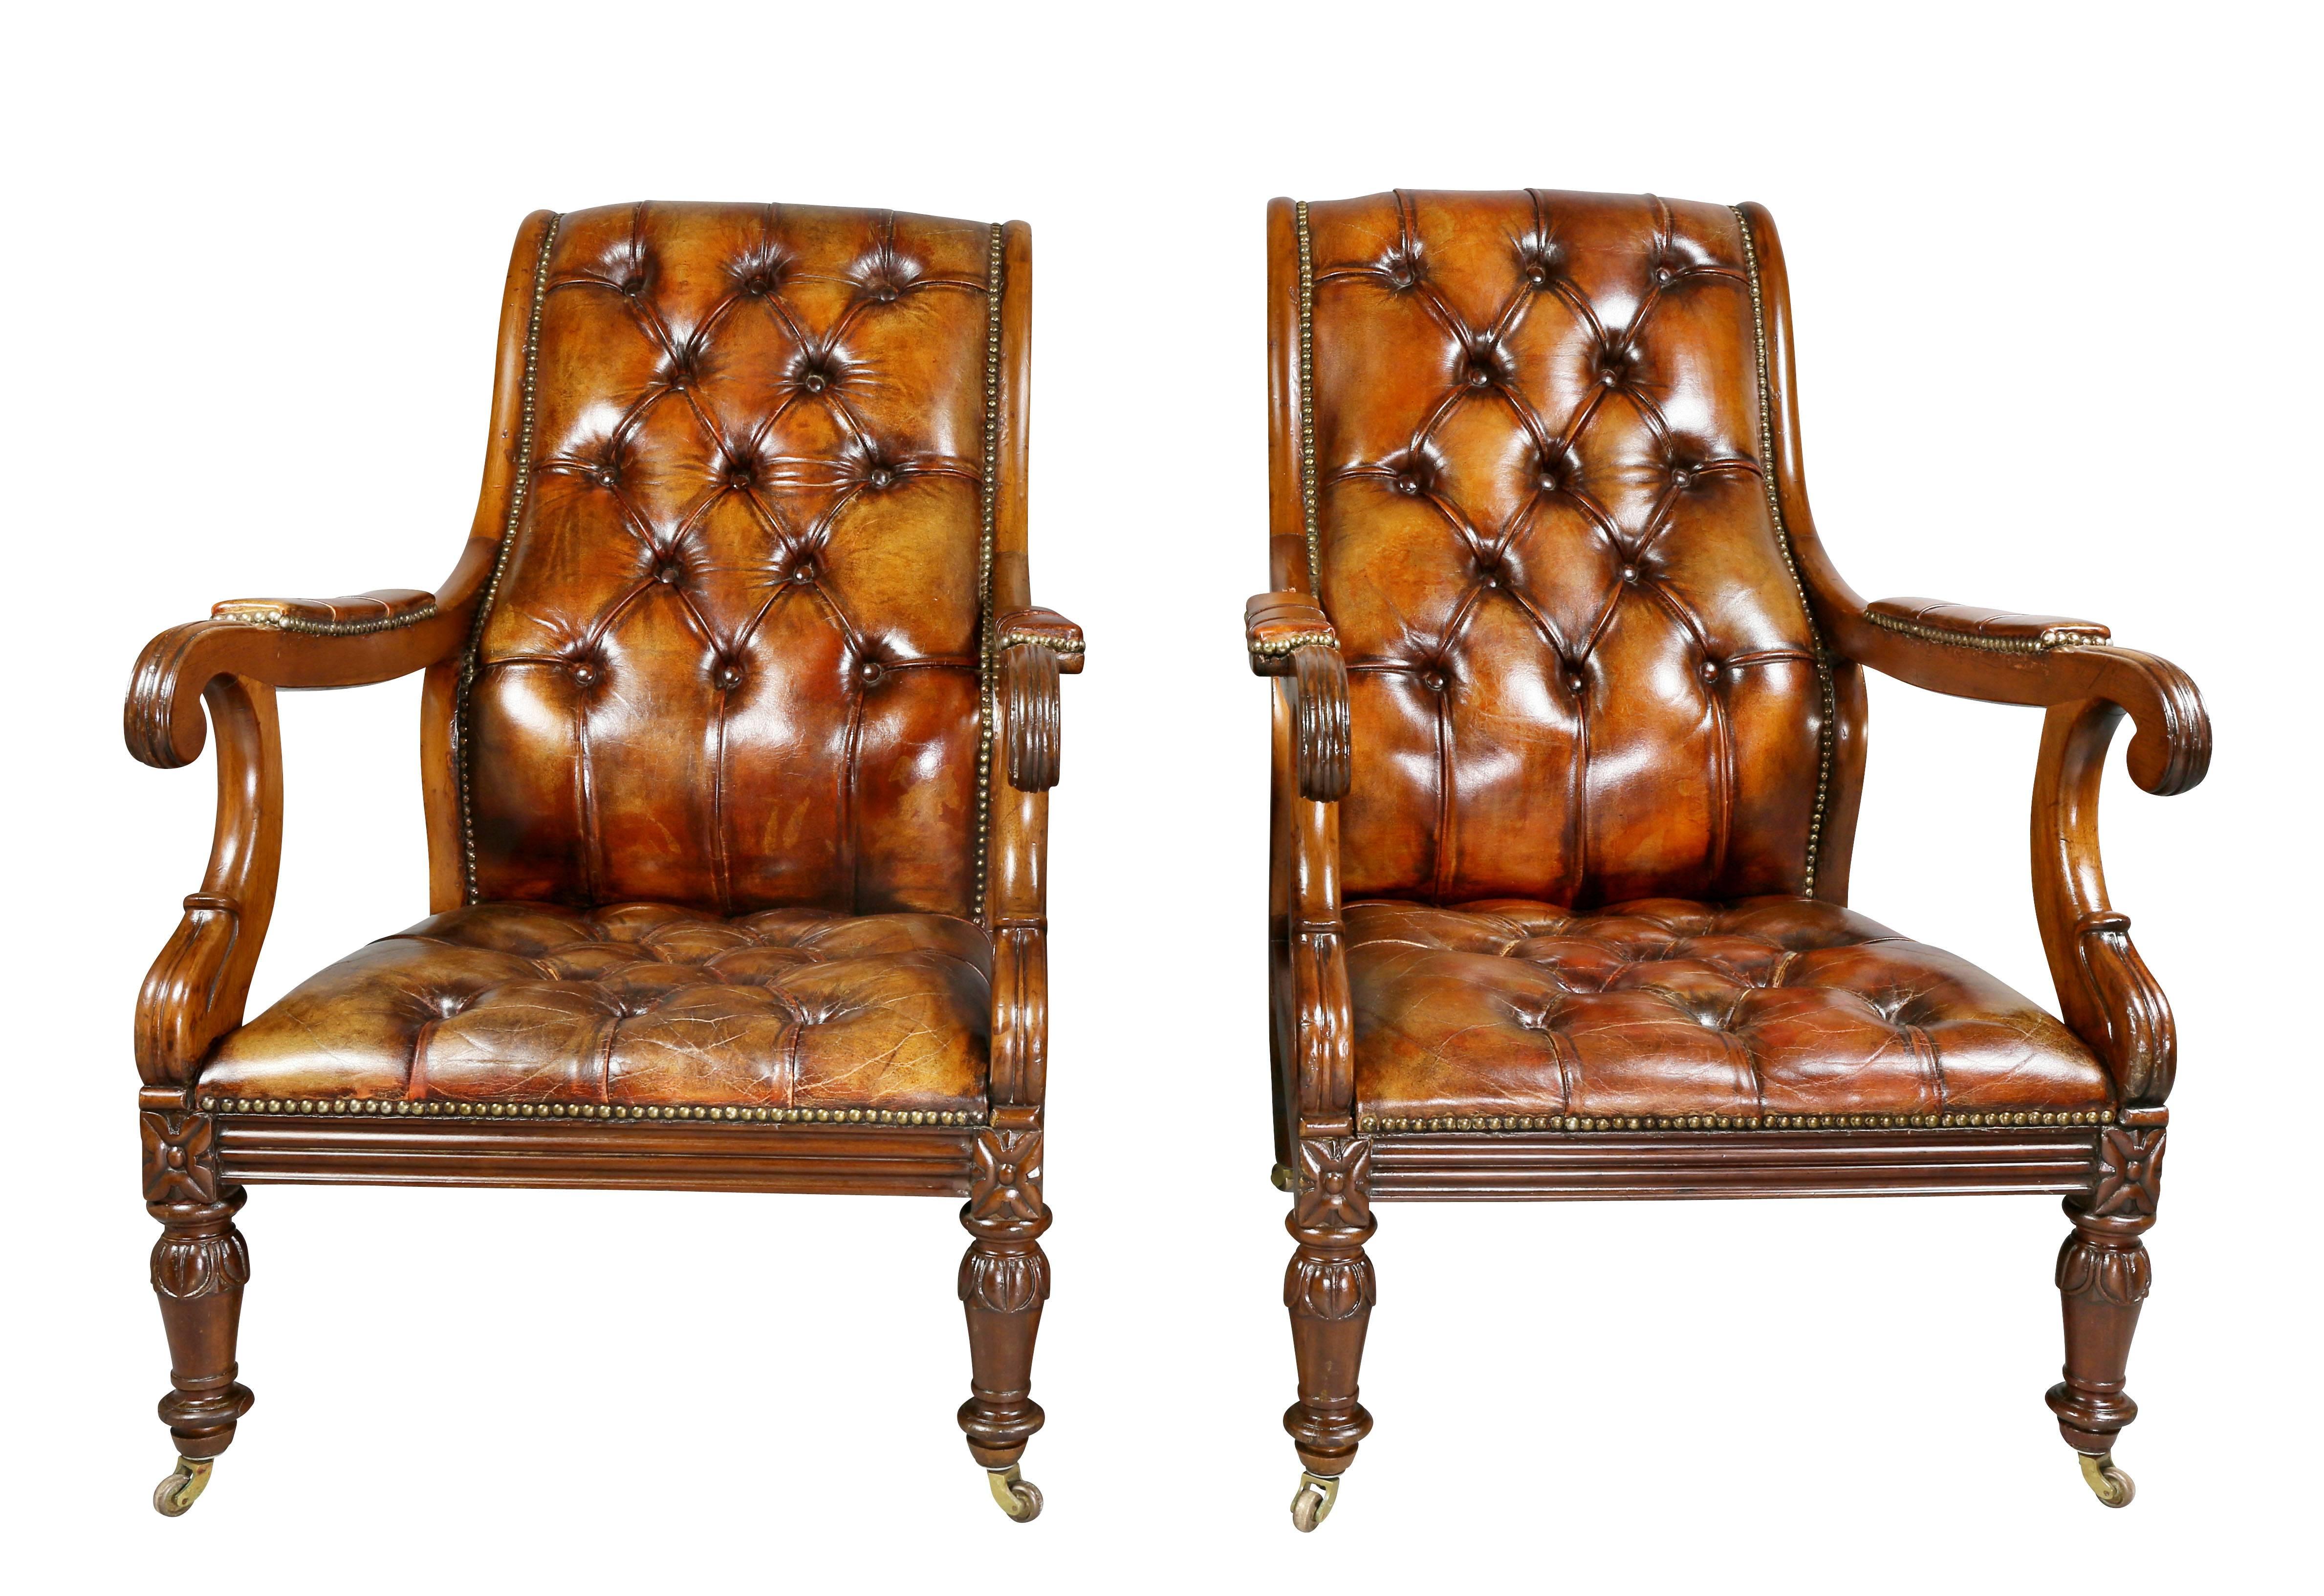 Great Britain (UK) Pair of Late Regency Mahogany and Leather Armchairs